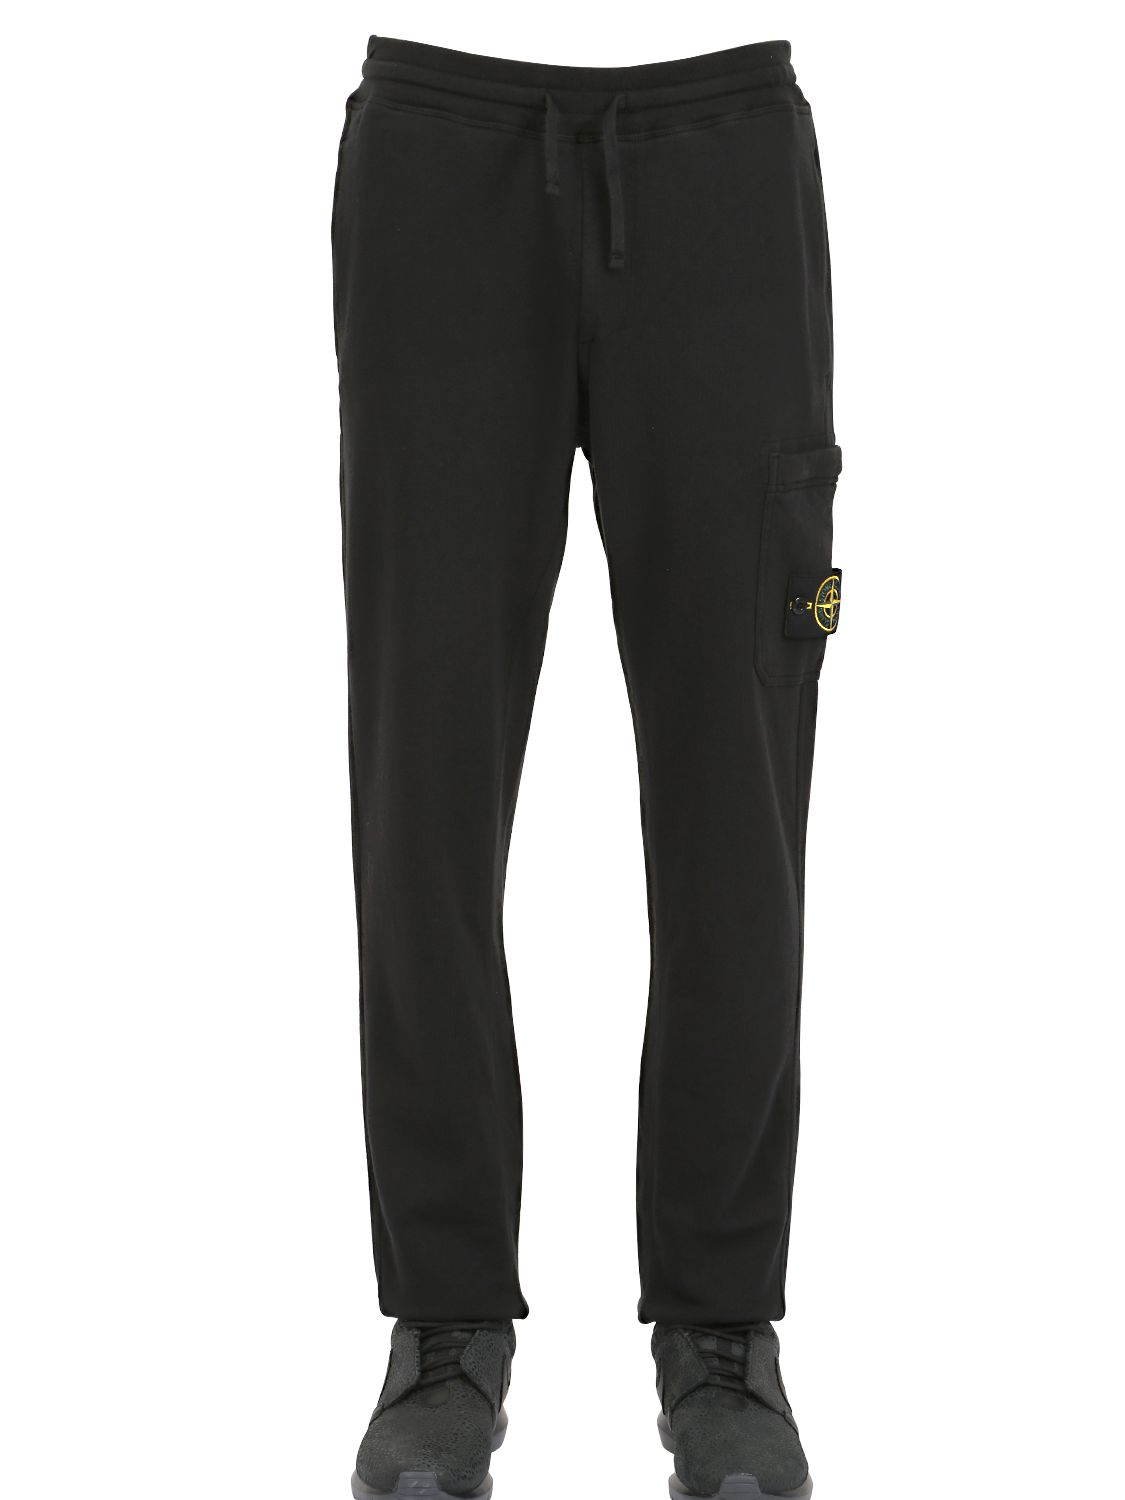 Lyst - Stone Island Garment Dyed Cotton Jogging Pants in Black for Men